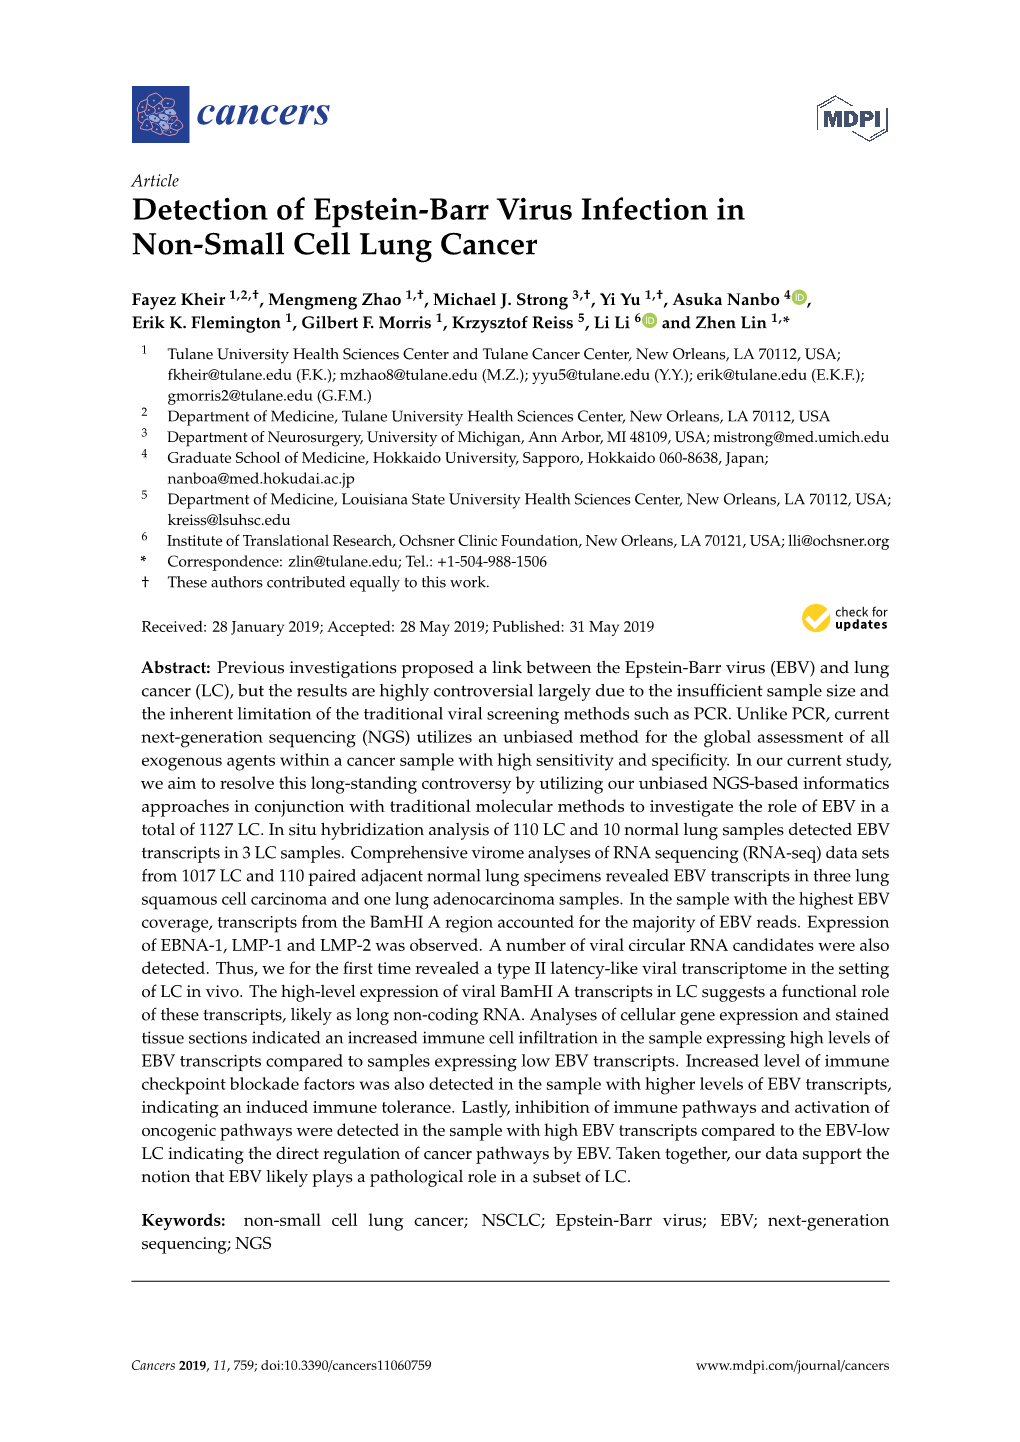 Detection of Epstein-Barr Virus Infection in Non-Small Cell Lung Cancer